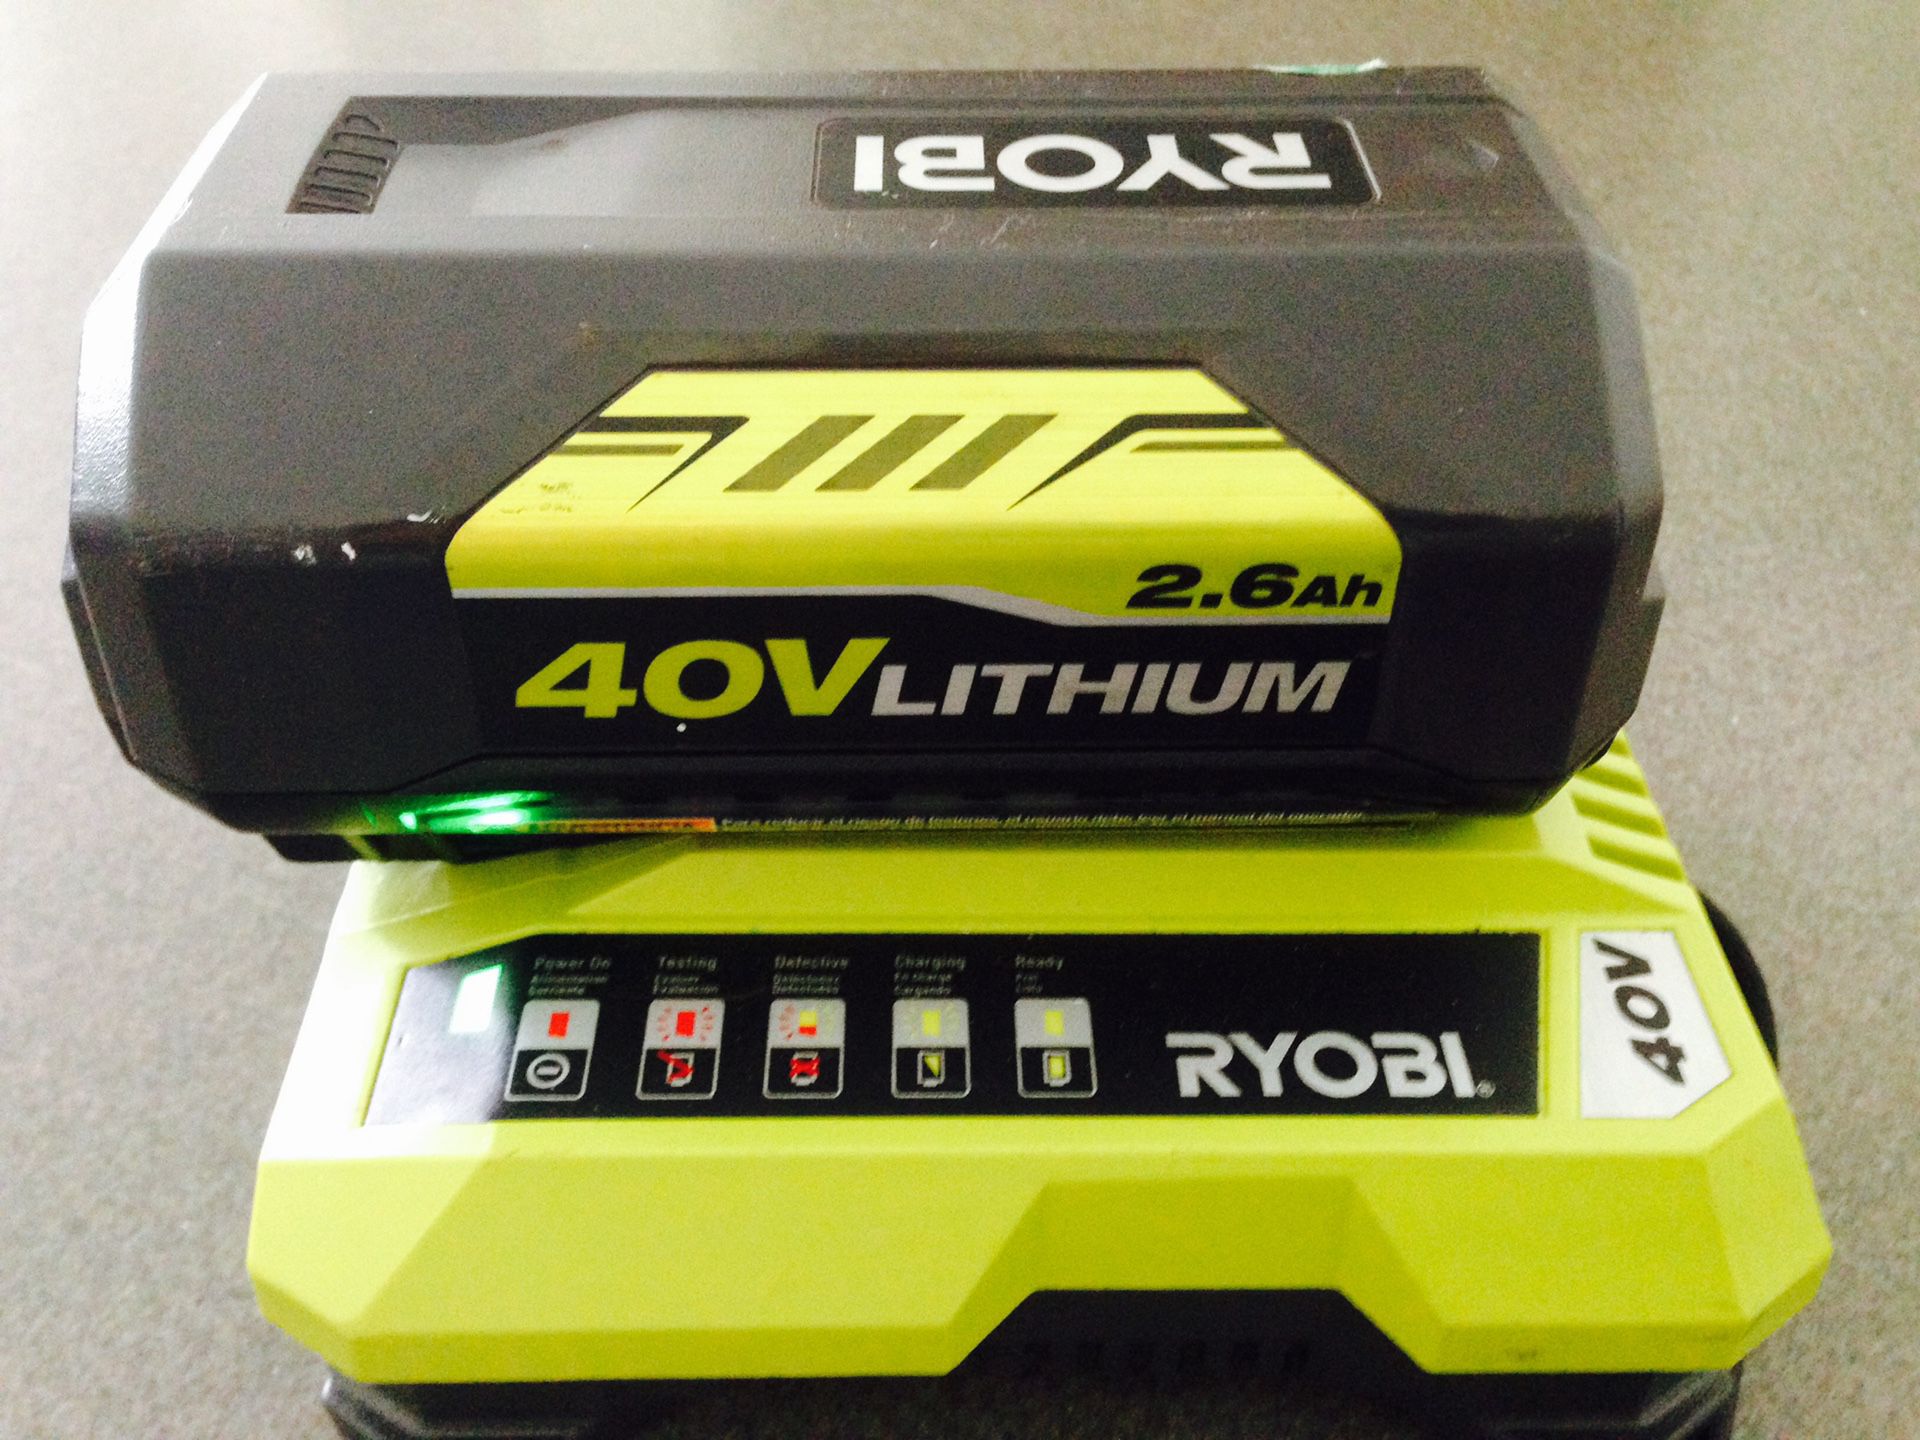 Ryobi 40 volt Battery full charge with battery charger firm on the price